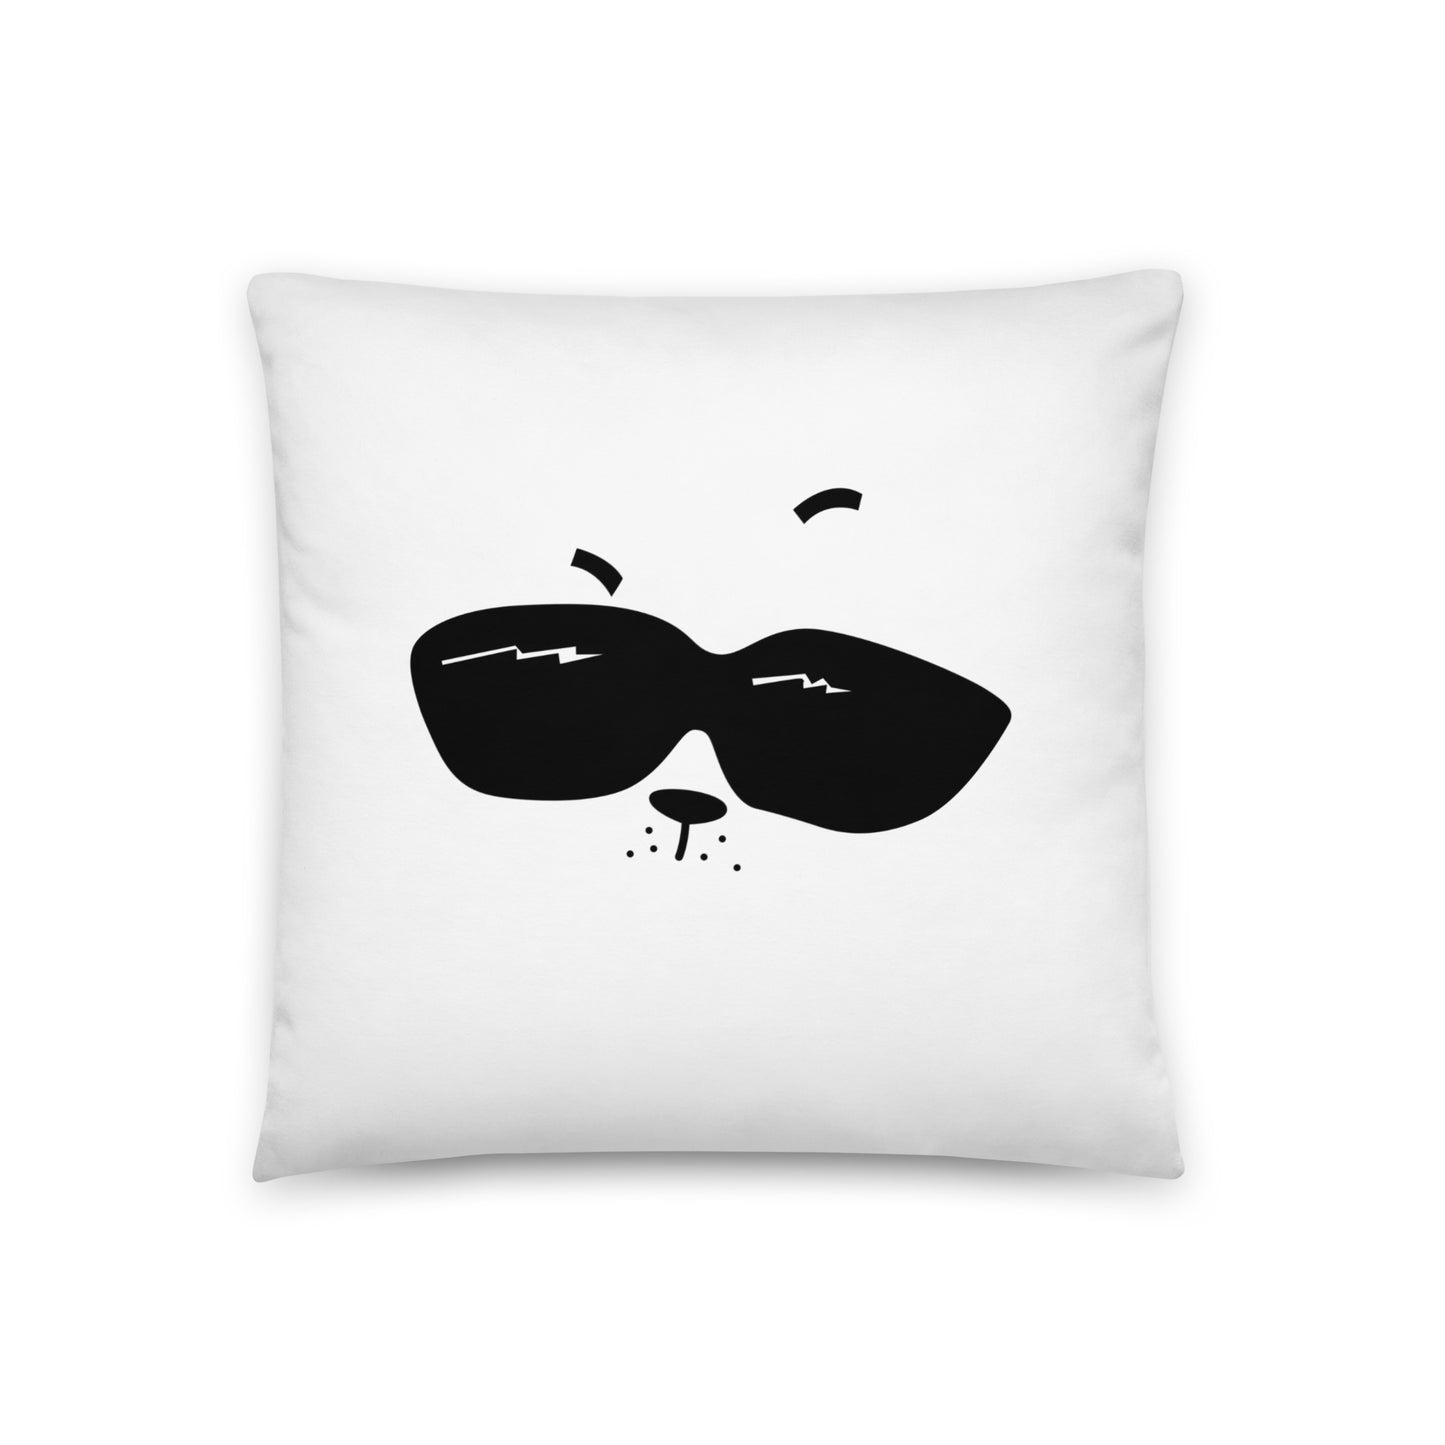 Pillow "I See You"